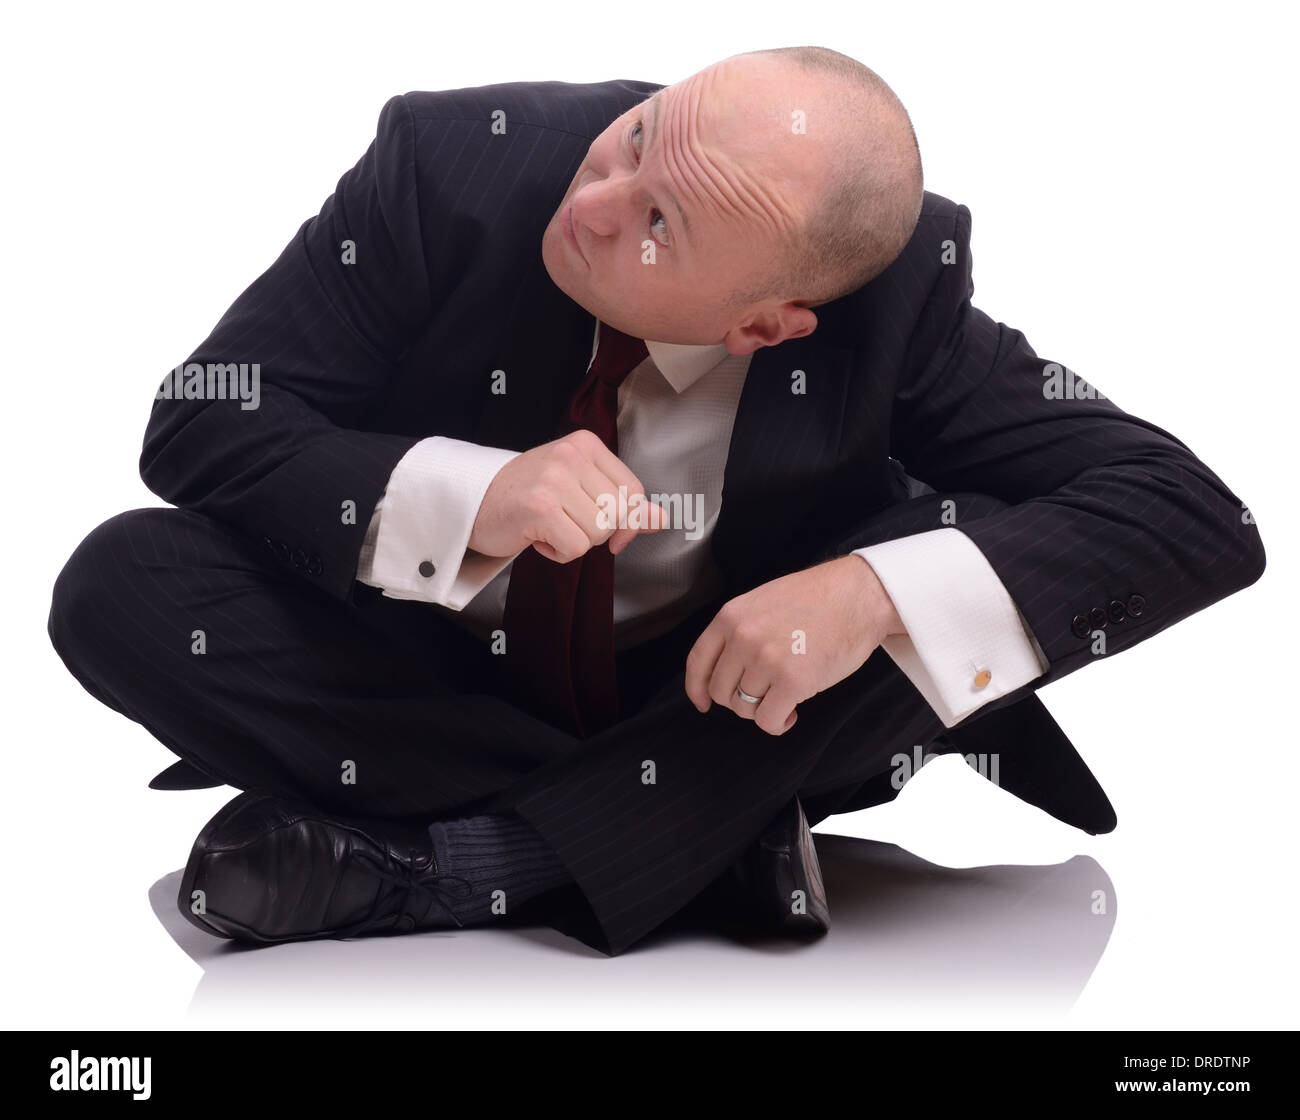 Businessman sat on the floor looking up and ducking down, isolated on a white background Stock Photo